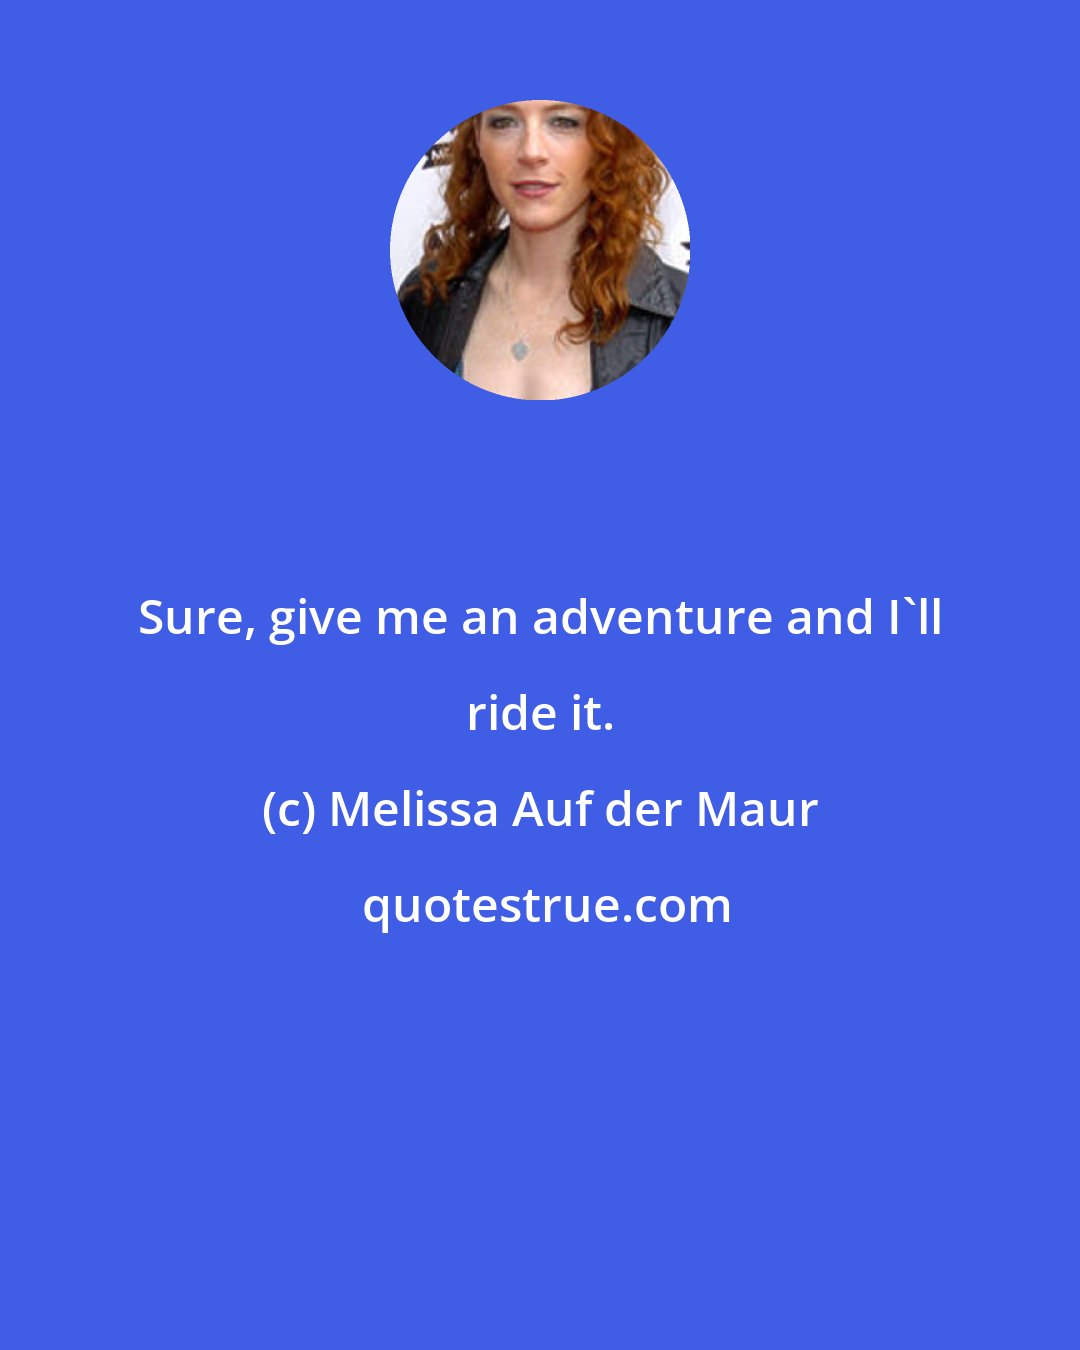 Melissa Auf der Maur: Sure, give me an adventure and I'll ride it.